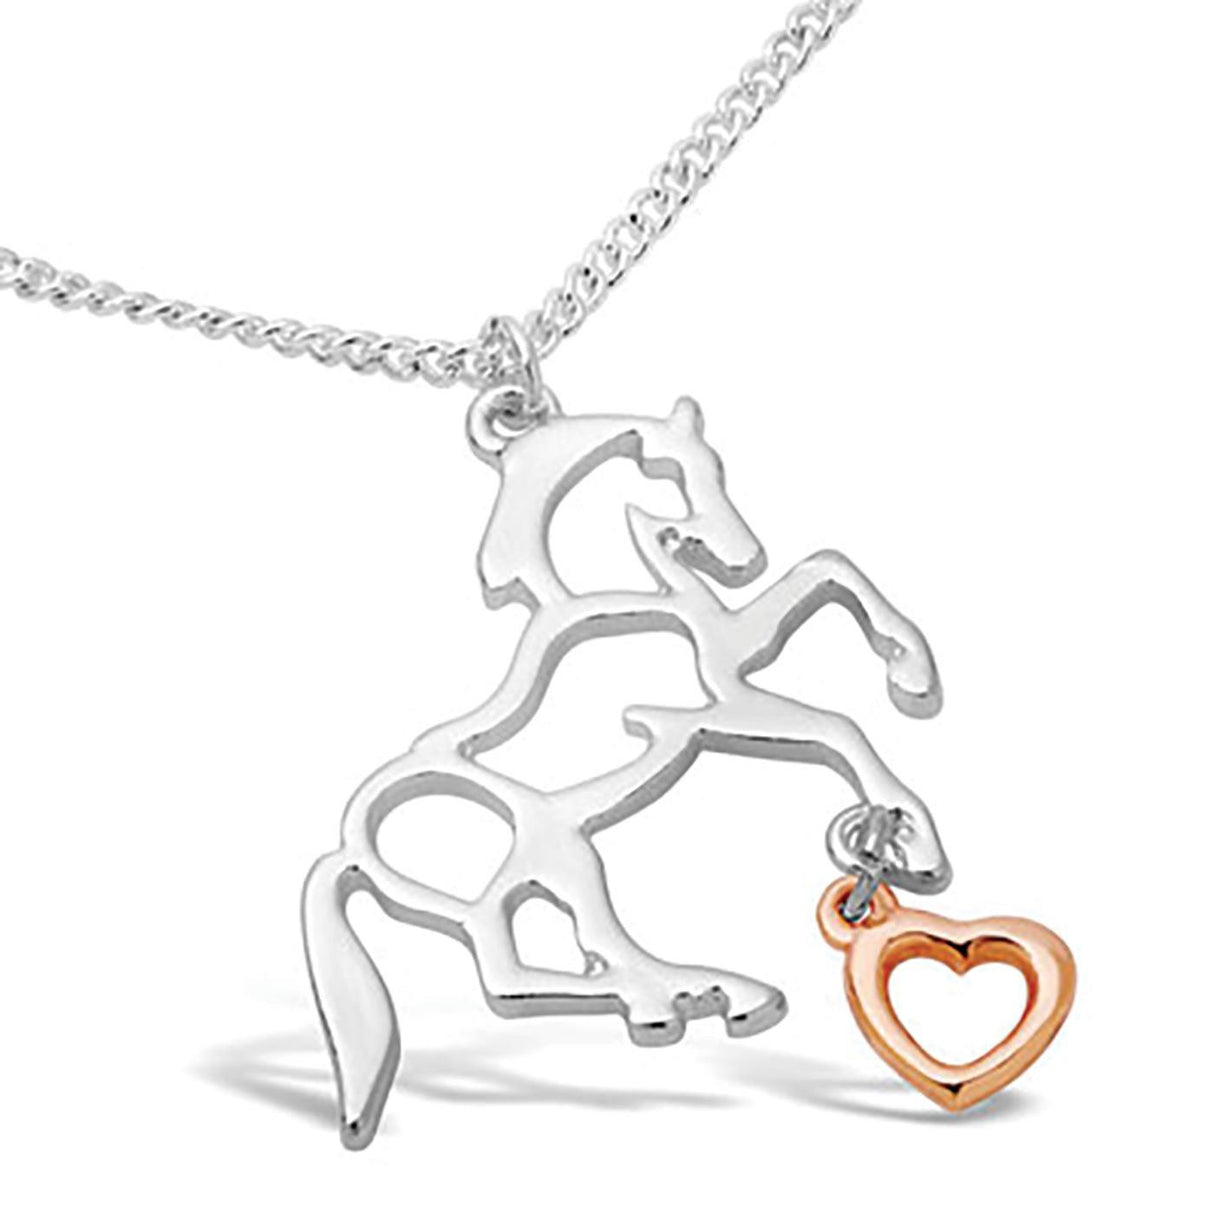 Kelley & Co Rose Gold Heart Suspended from Hoof Necklace